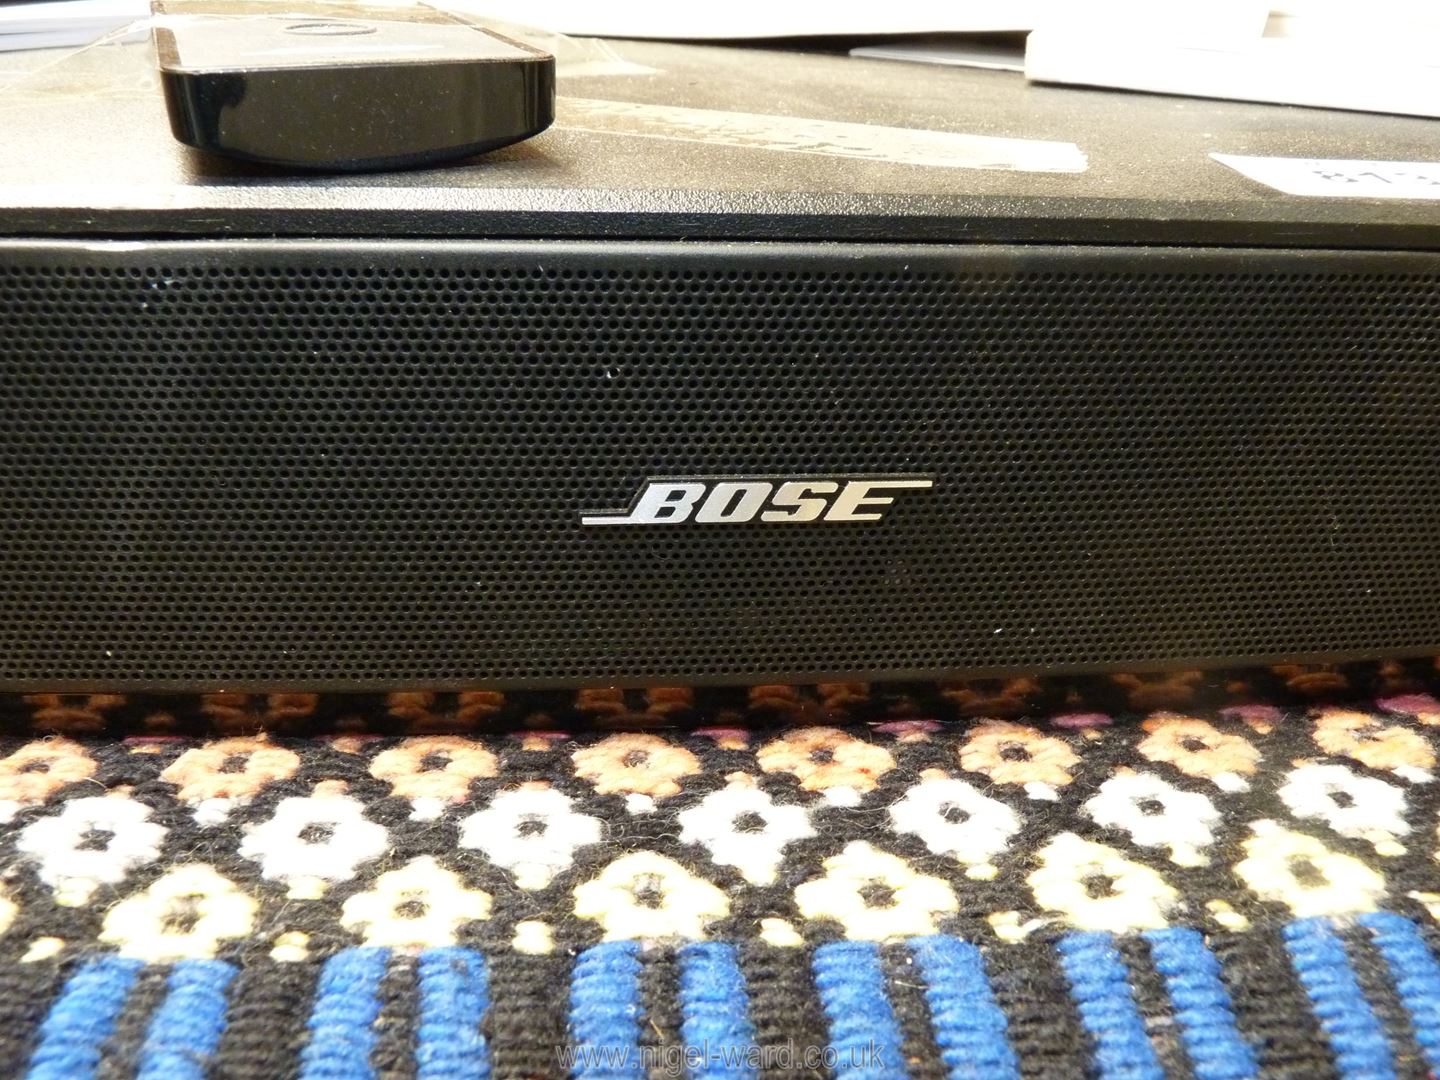 Bose TV sound system with remote. - Image 3 of 3